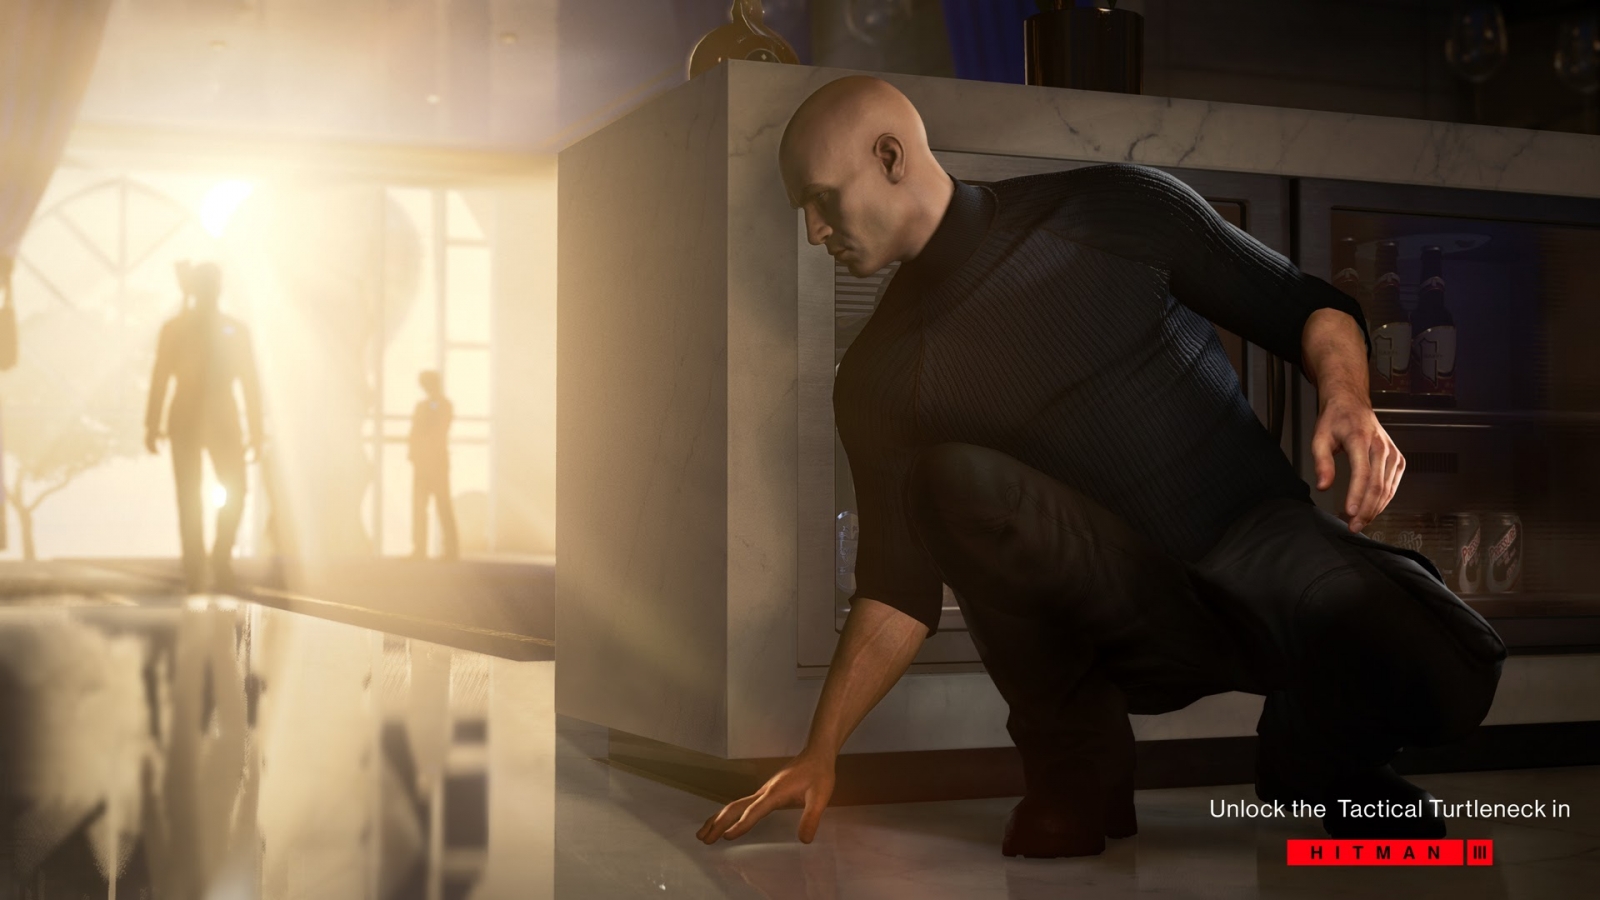 PS4 - Hitman 3) For upgrading the Starter Pack to the full game, do I have  to buy any edition of the game to unlock it fully, or can I just buy